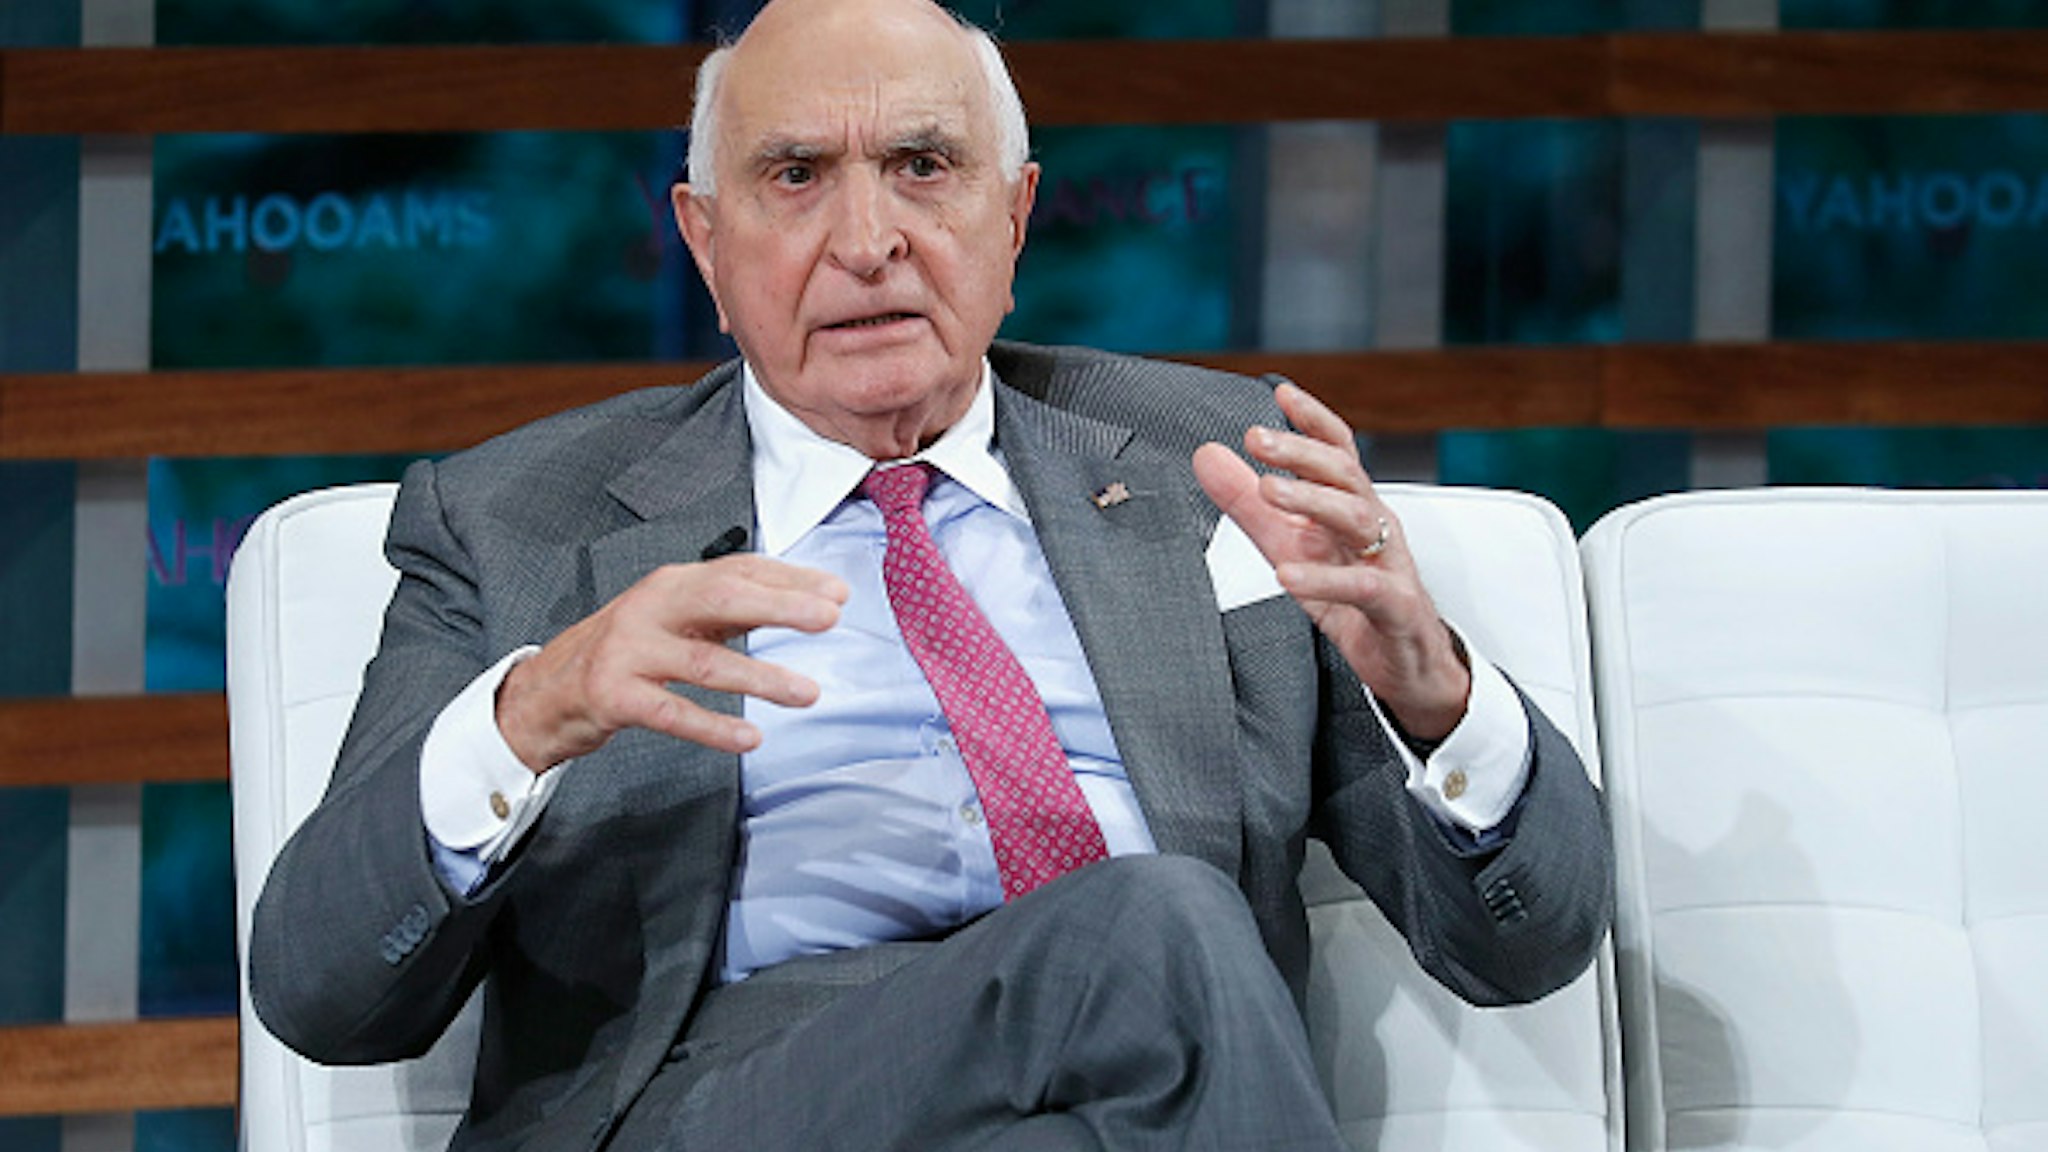 NEW YORK, NY - SEPTEMBER 20: Home Depot co-funders Ken Langone peaks during the 2018 Yahoo Finance All Markets Summit at The Times Center on September 20, 2018 in New York City.